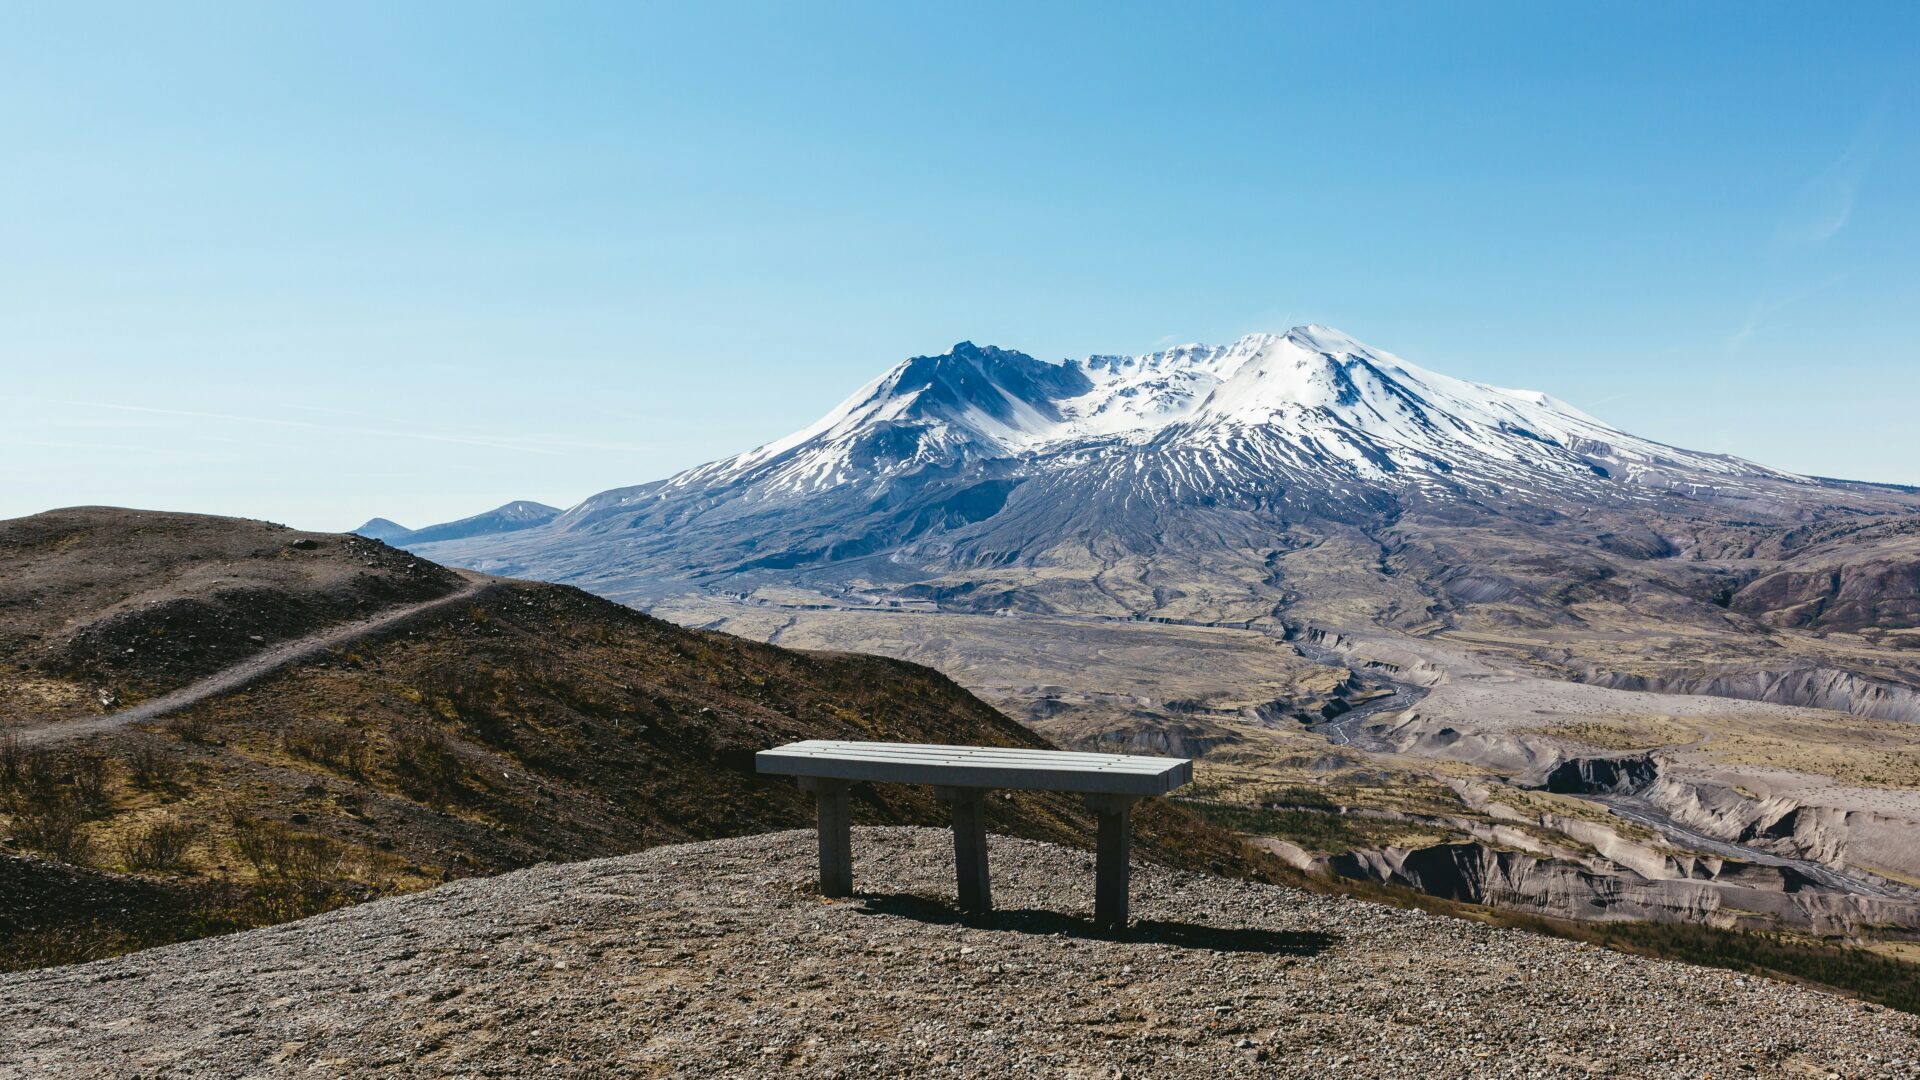 What to do at Mt St Helens